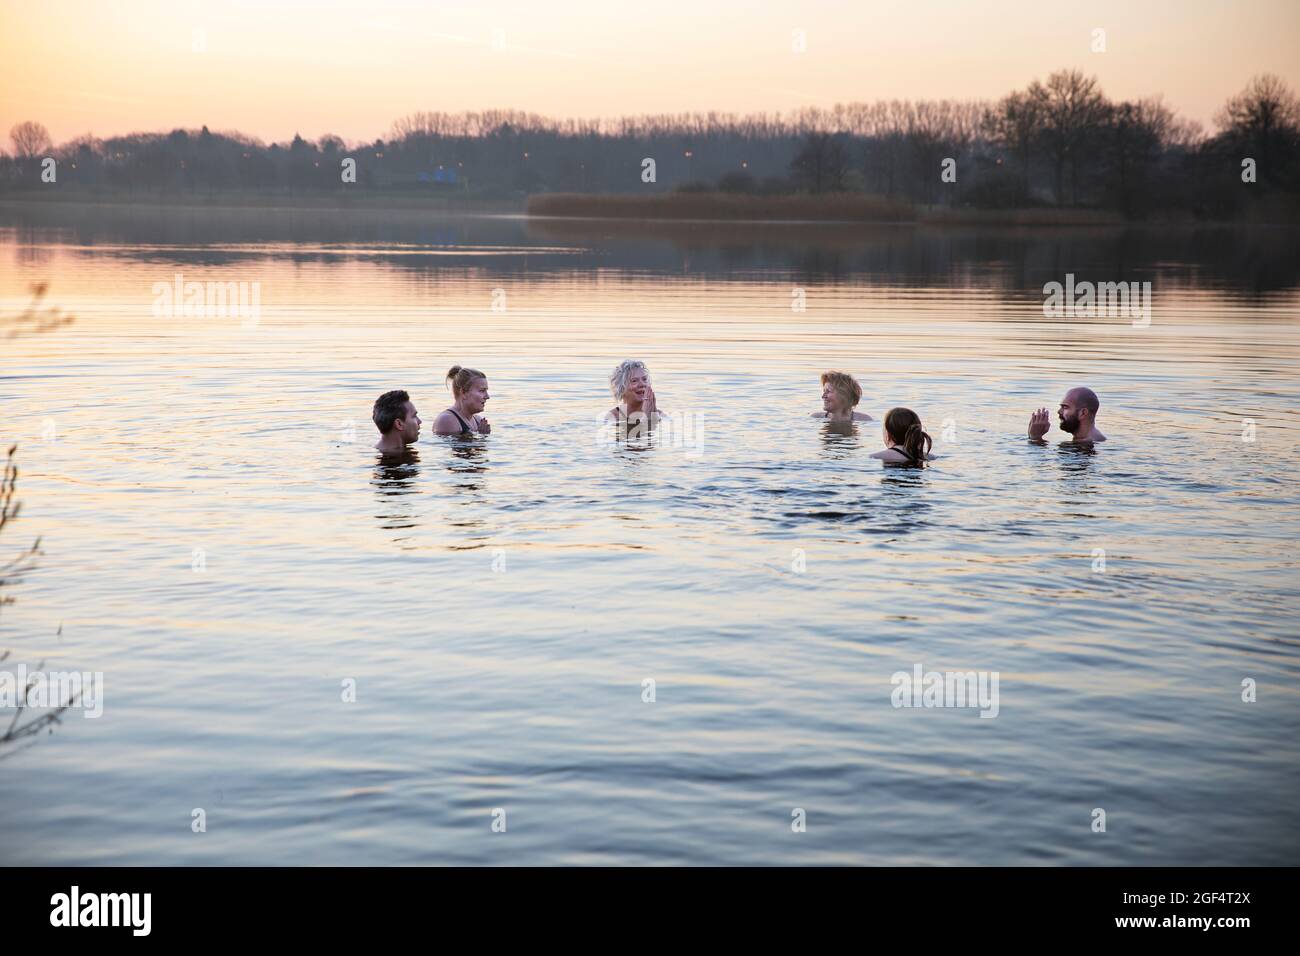 Men and women enjoying cold water in the morning Stock Photo